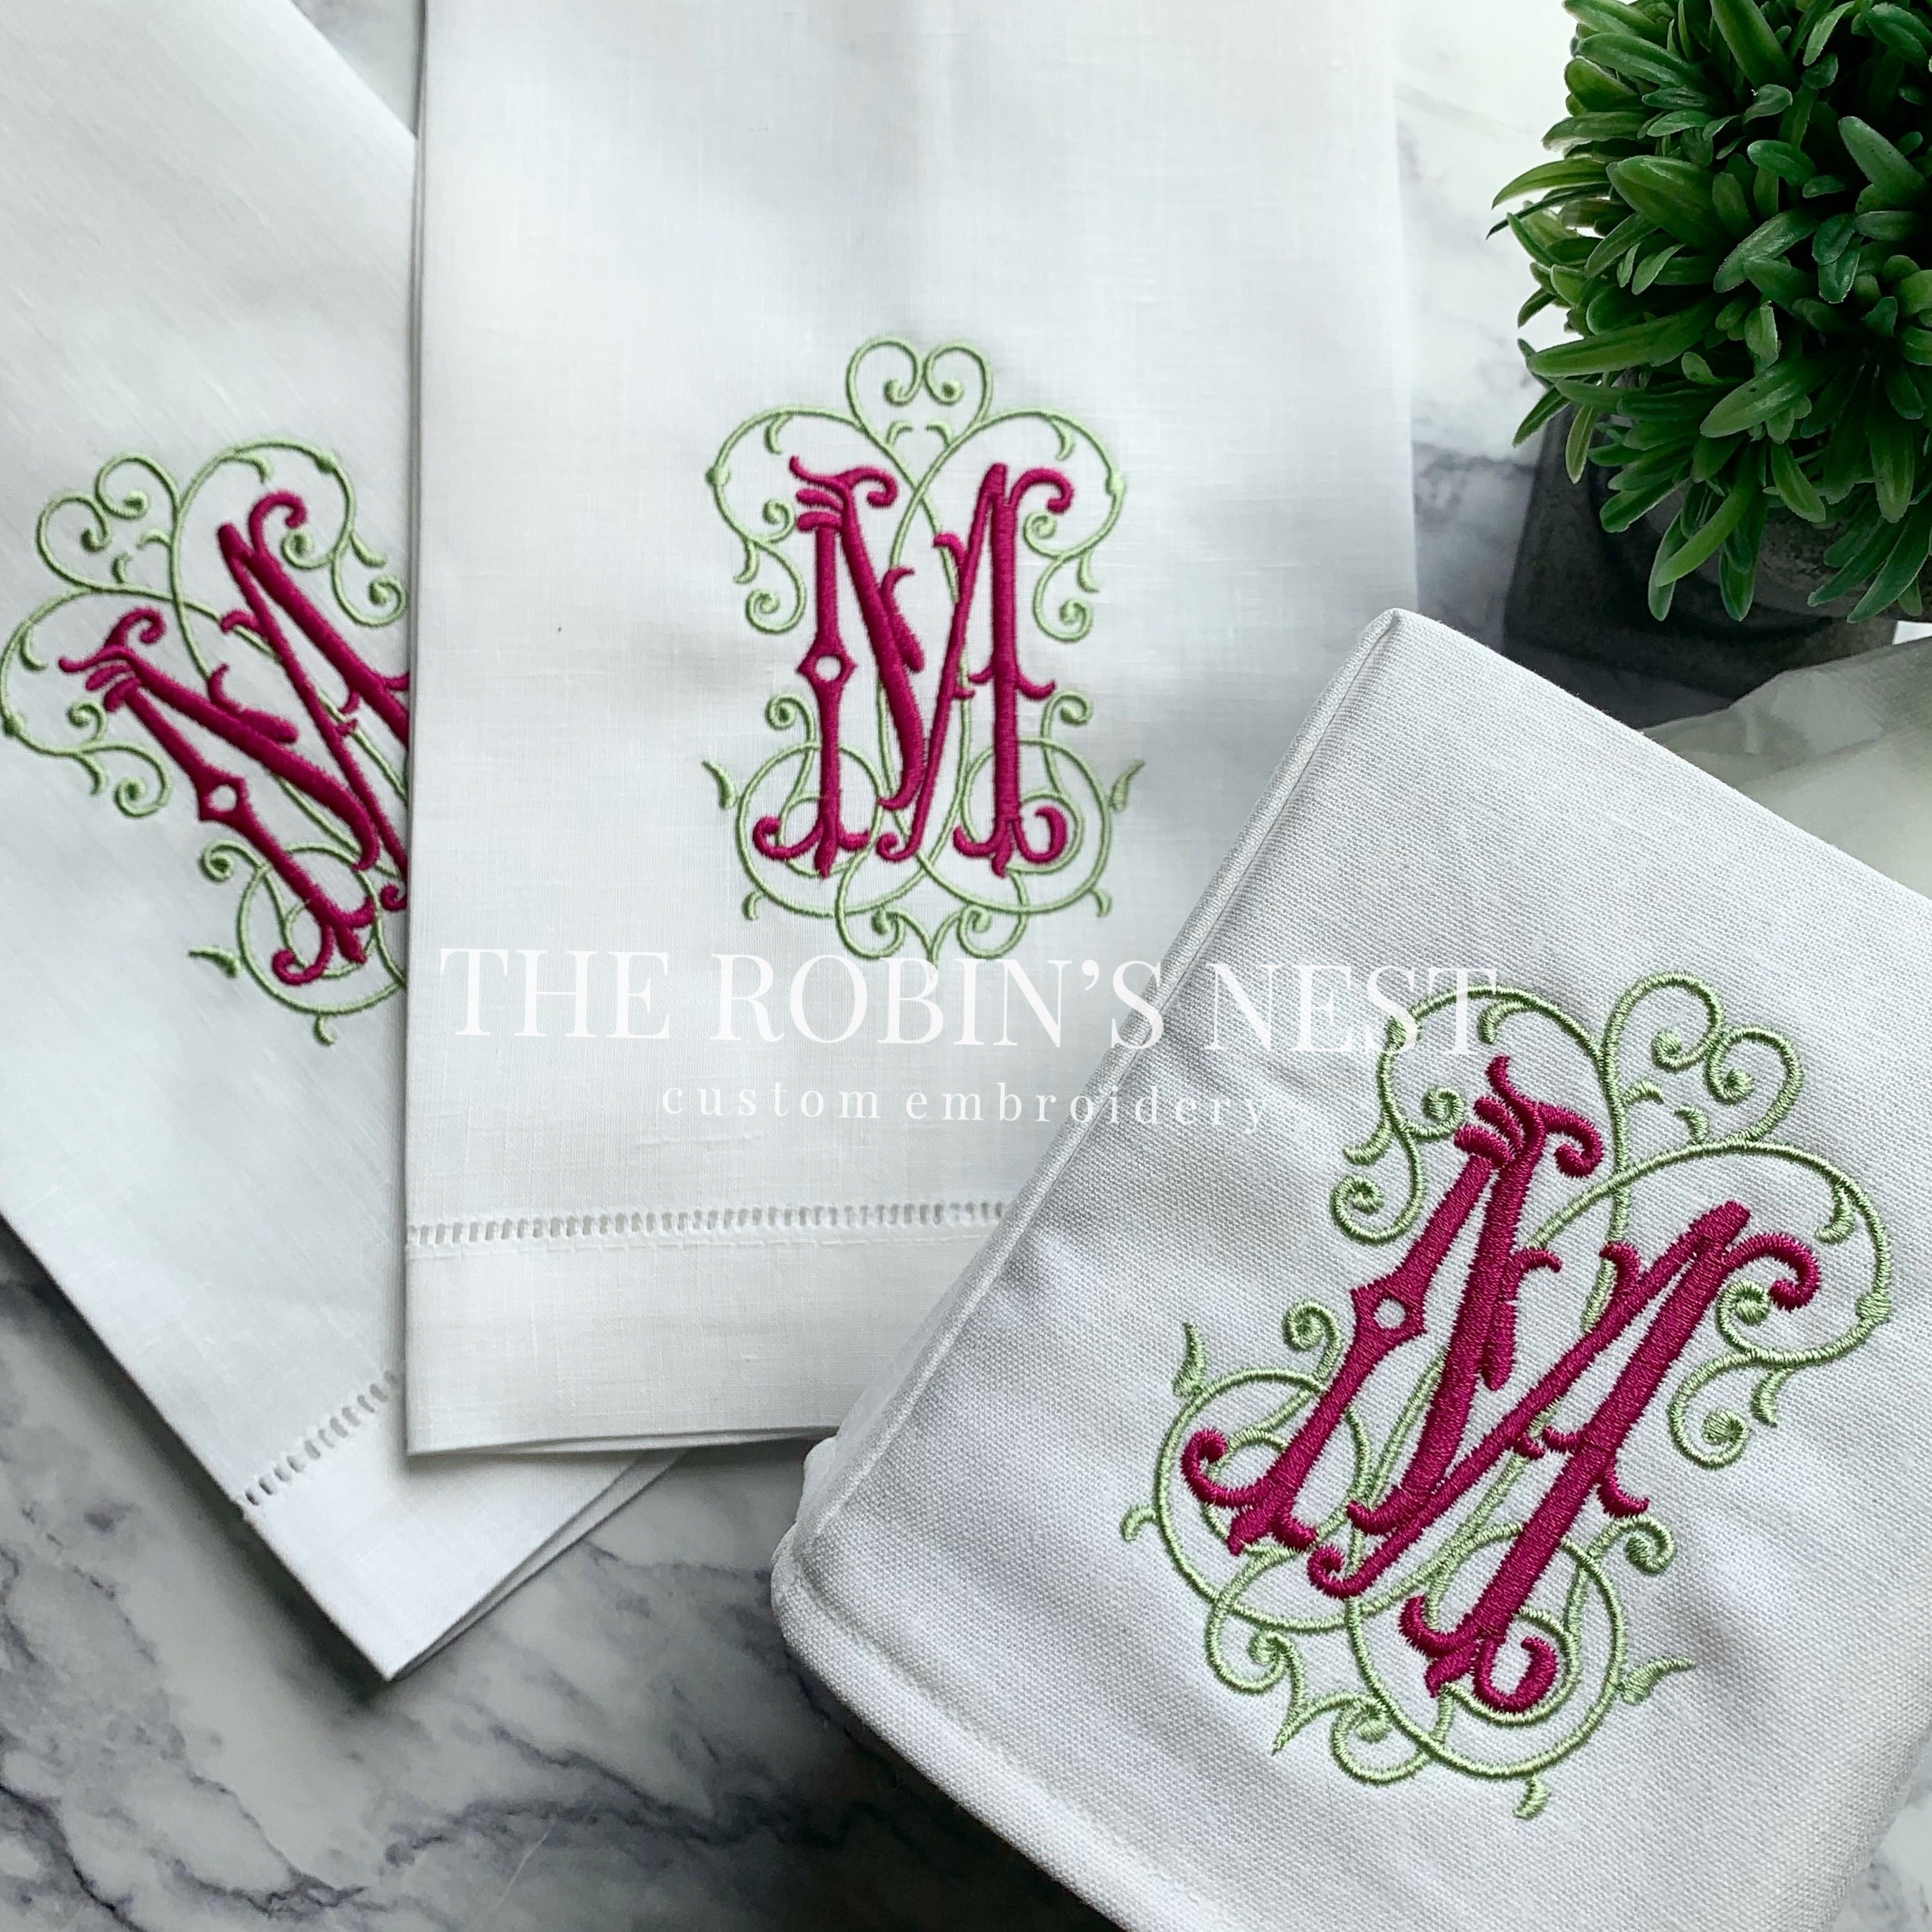 Dinner Napkins – The Robin's Nest Embroidery